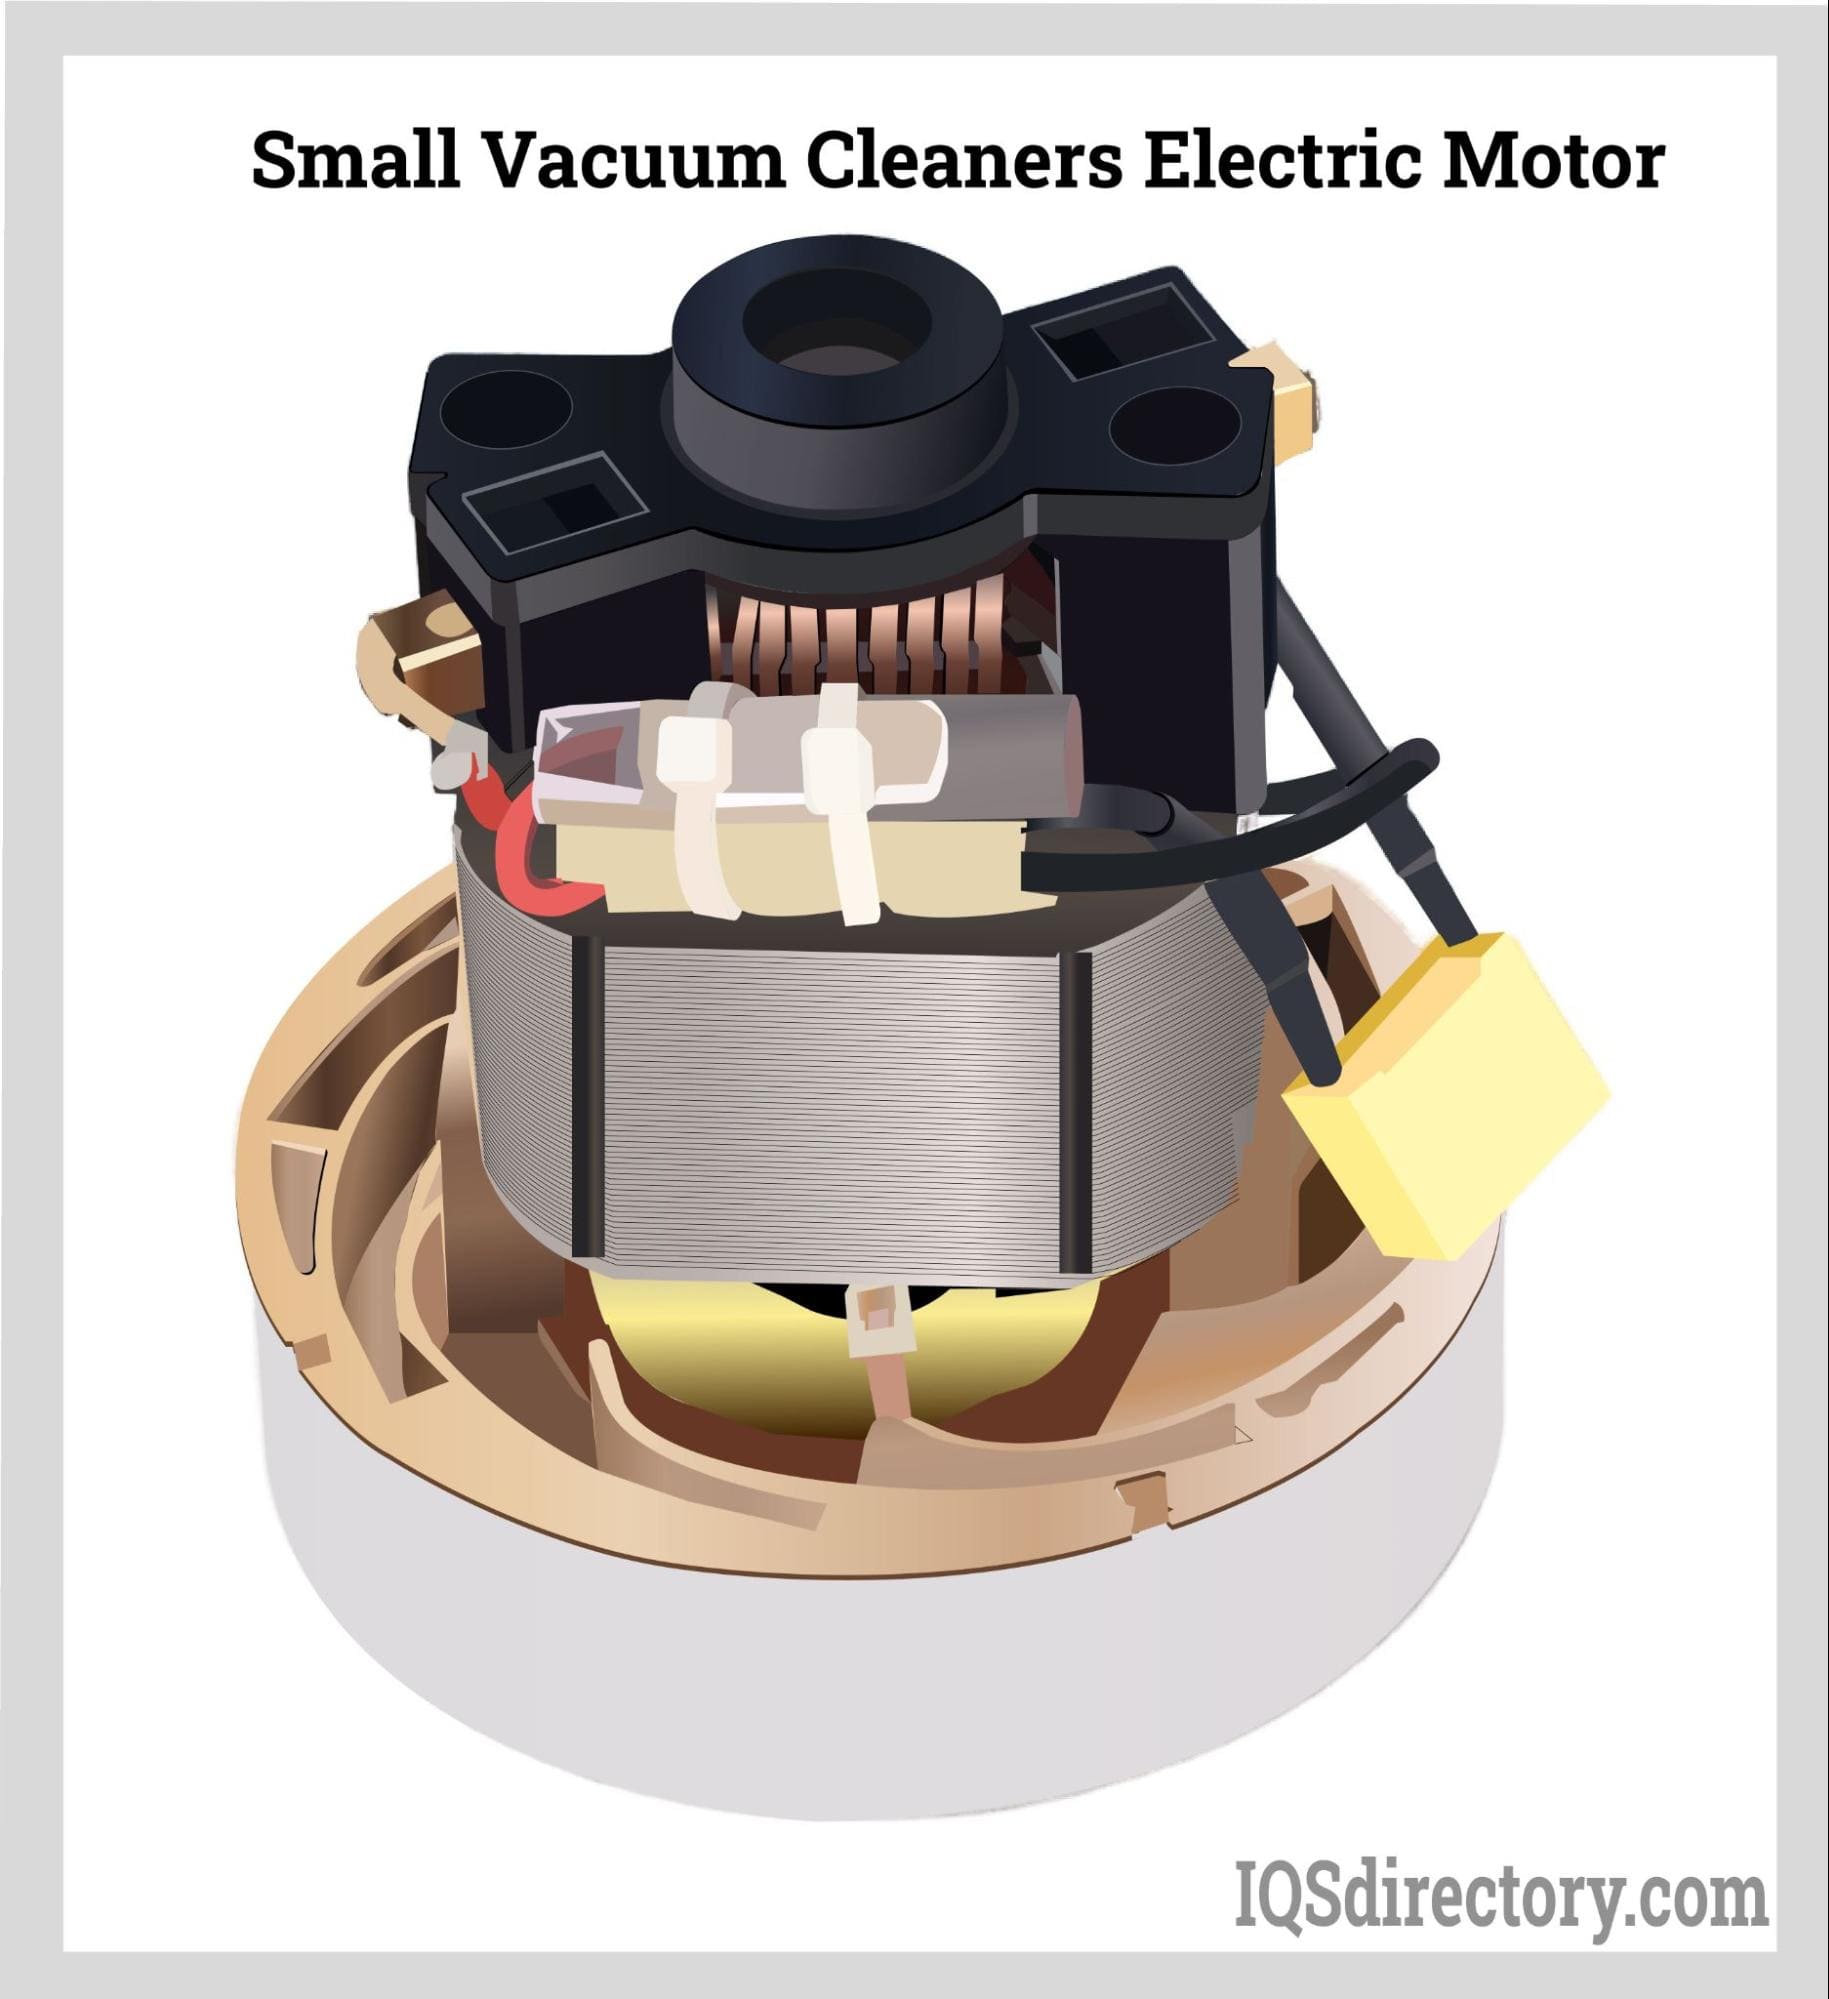 Small Vacuum Cleaners Electric Motor